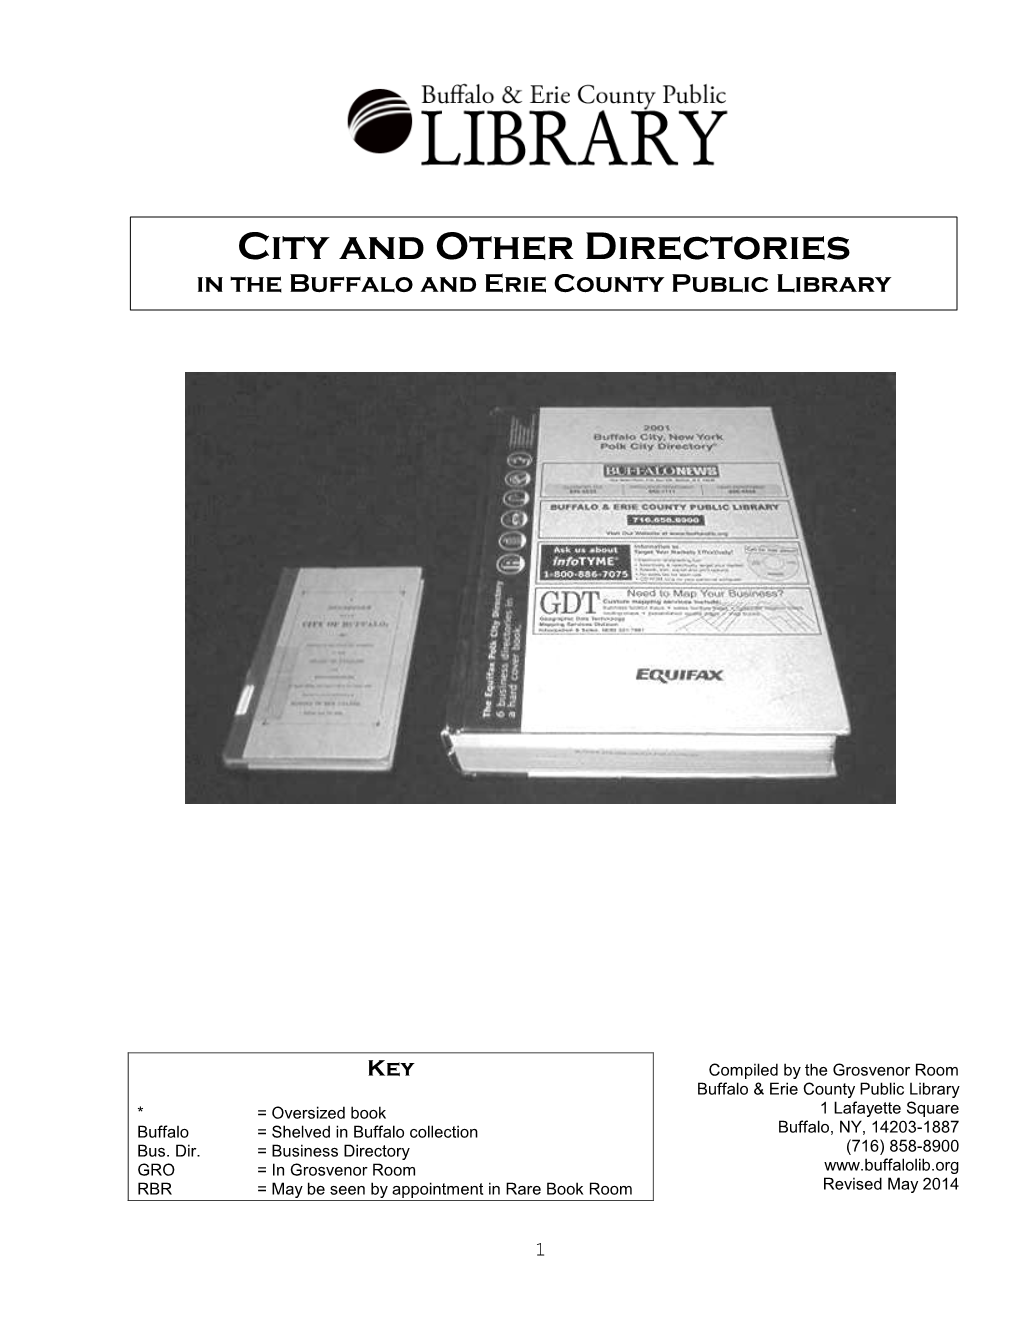 Holdings of City Directories At